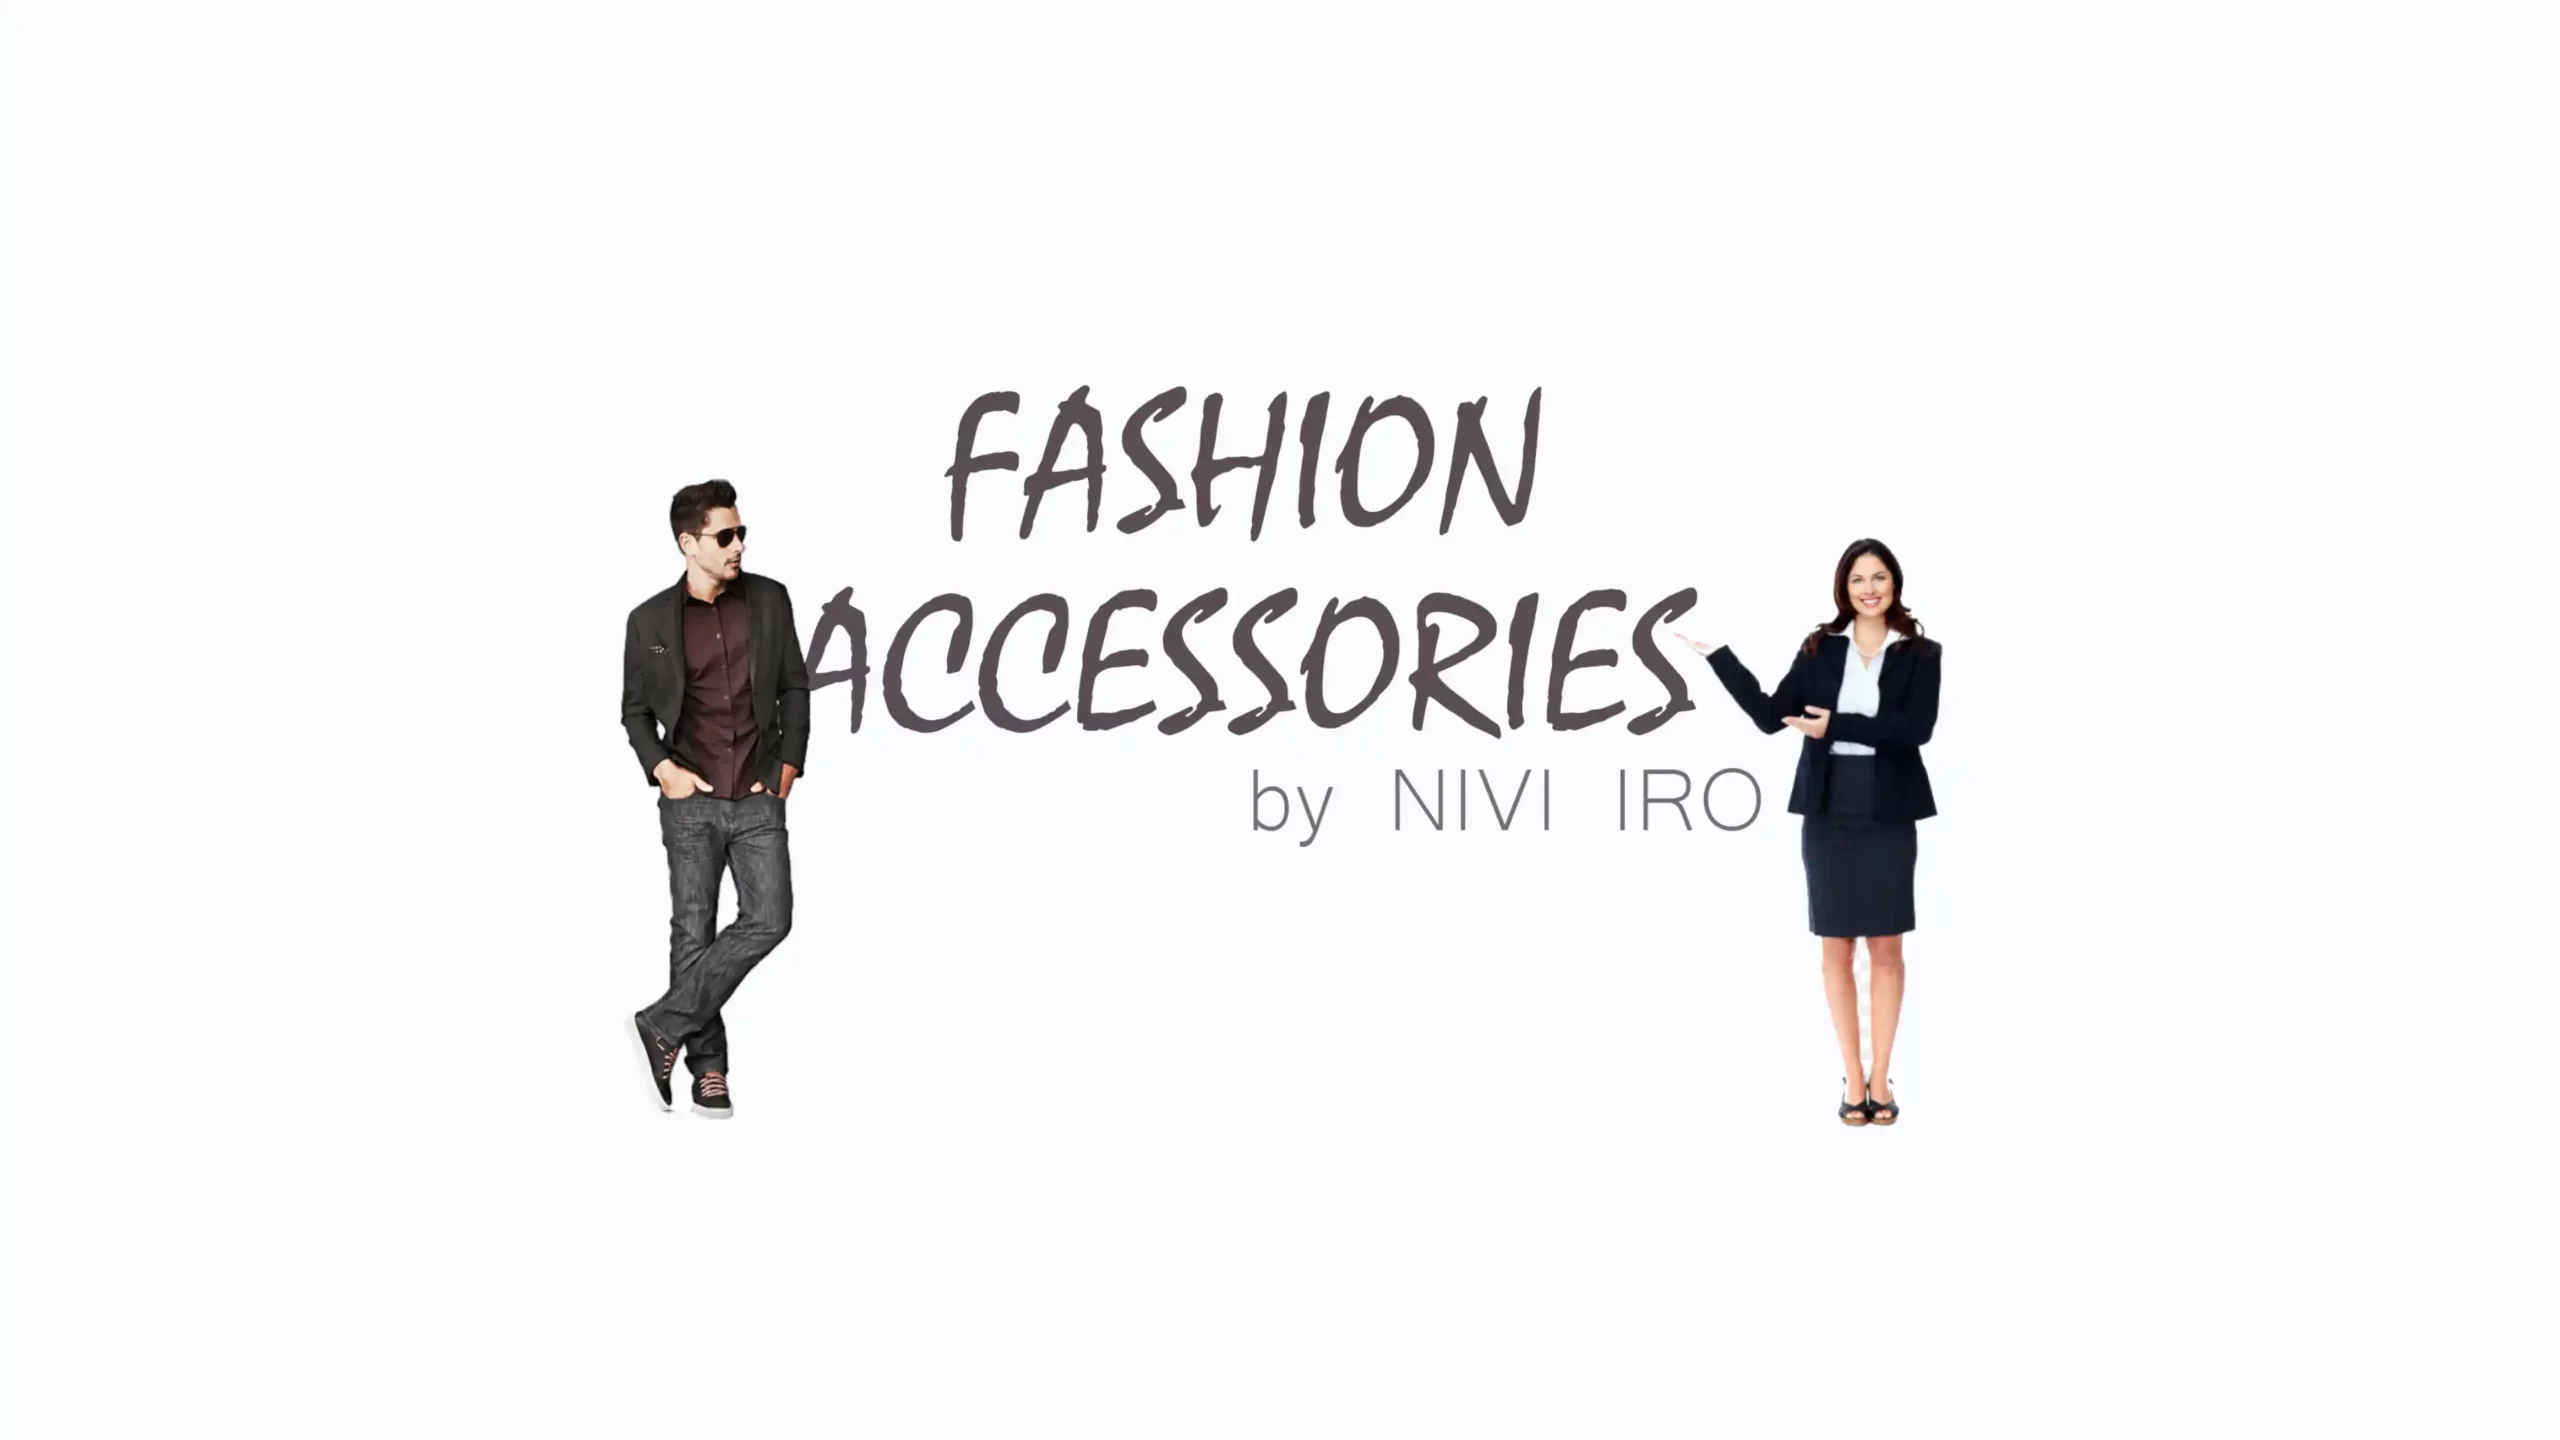 FASHION ACCESSORIES BUSINESS & WHATSAPP GROUP LINK